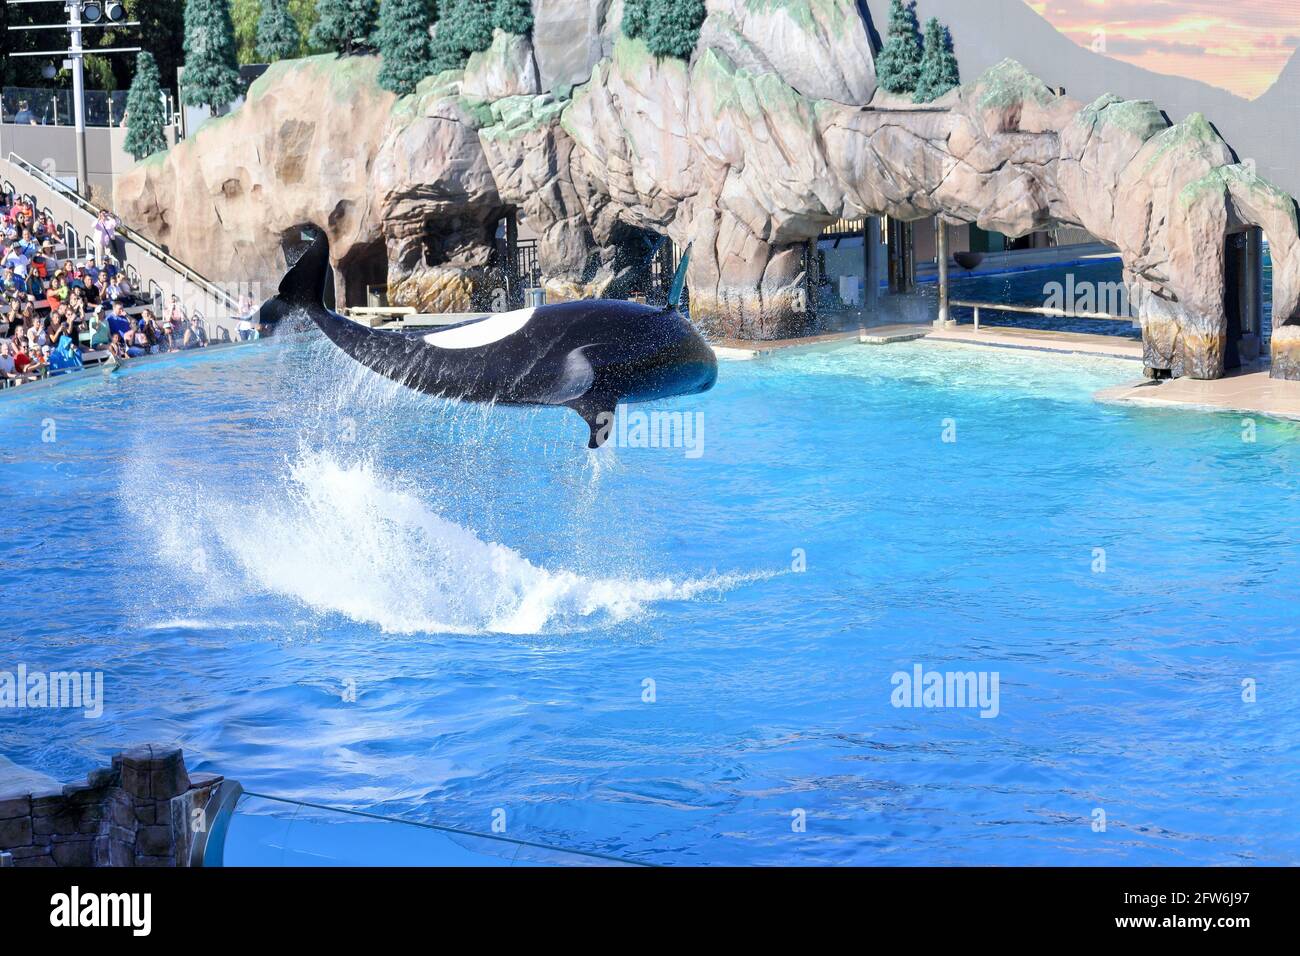 Killer whale jumping out of water flying in the air during a show at Sea world, San Diego Stock Photo